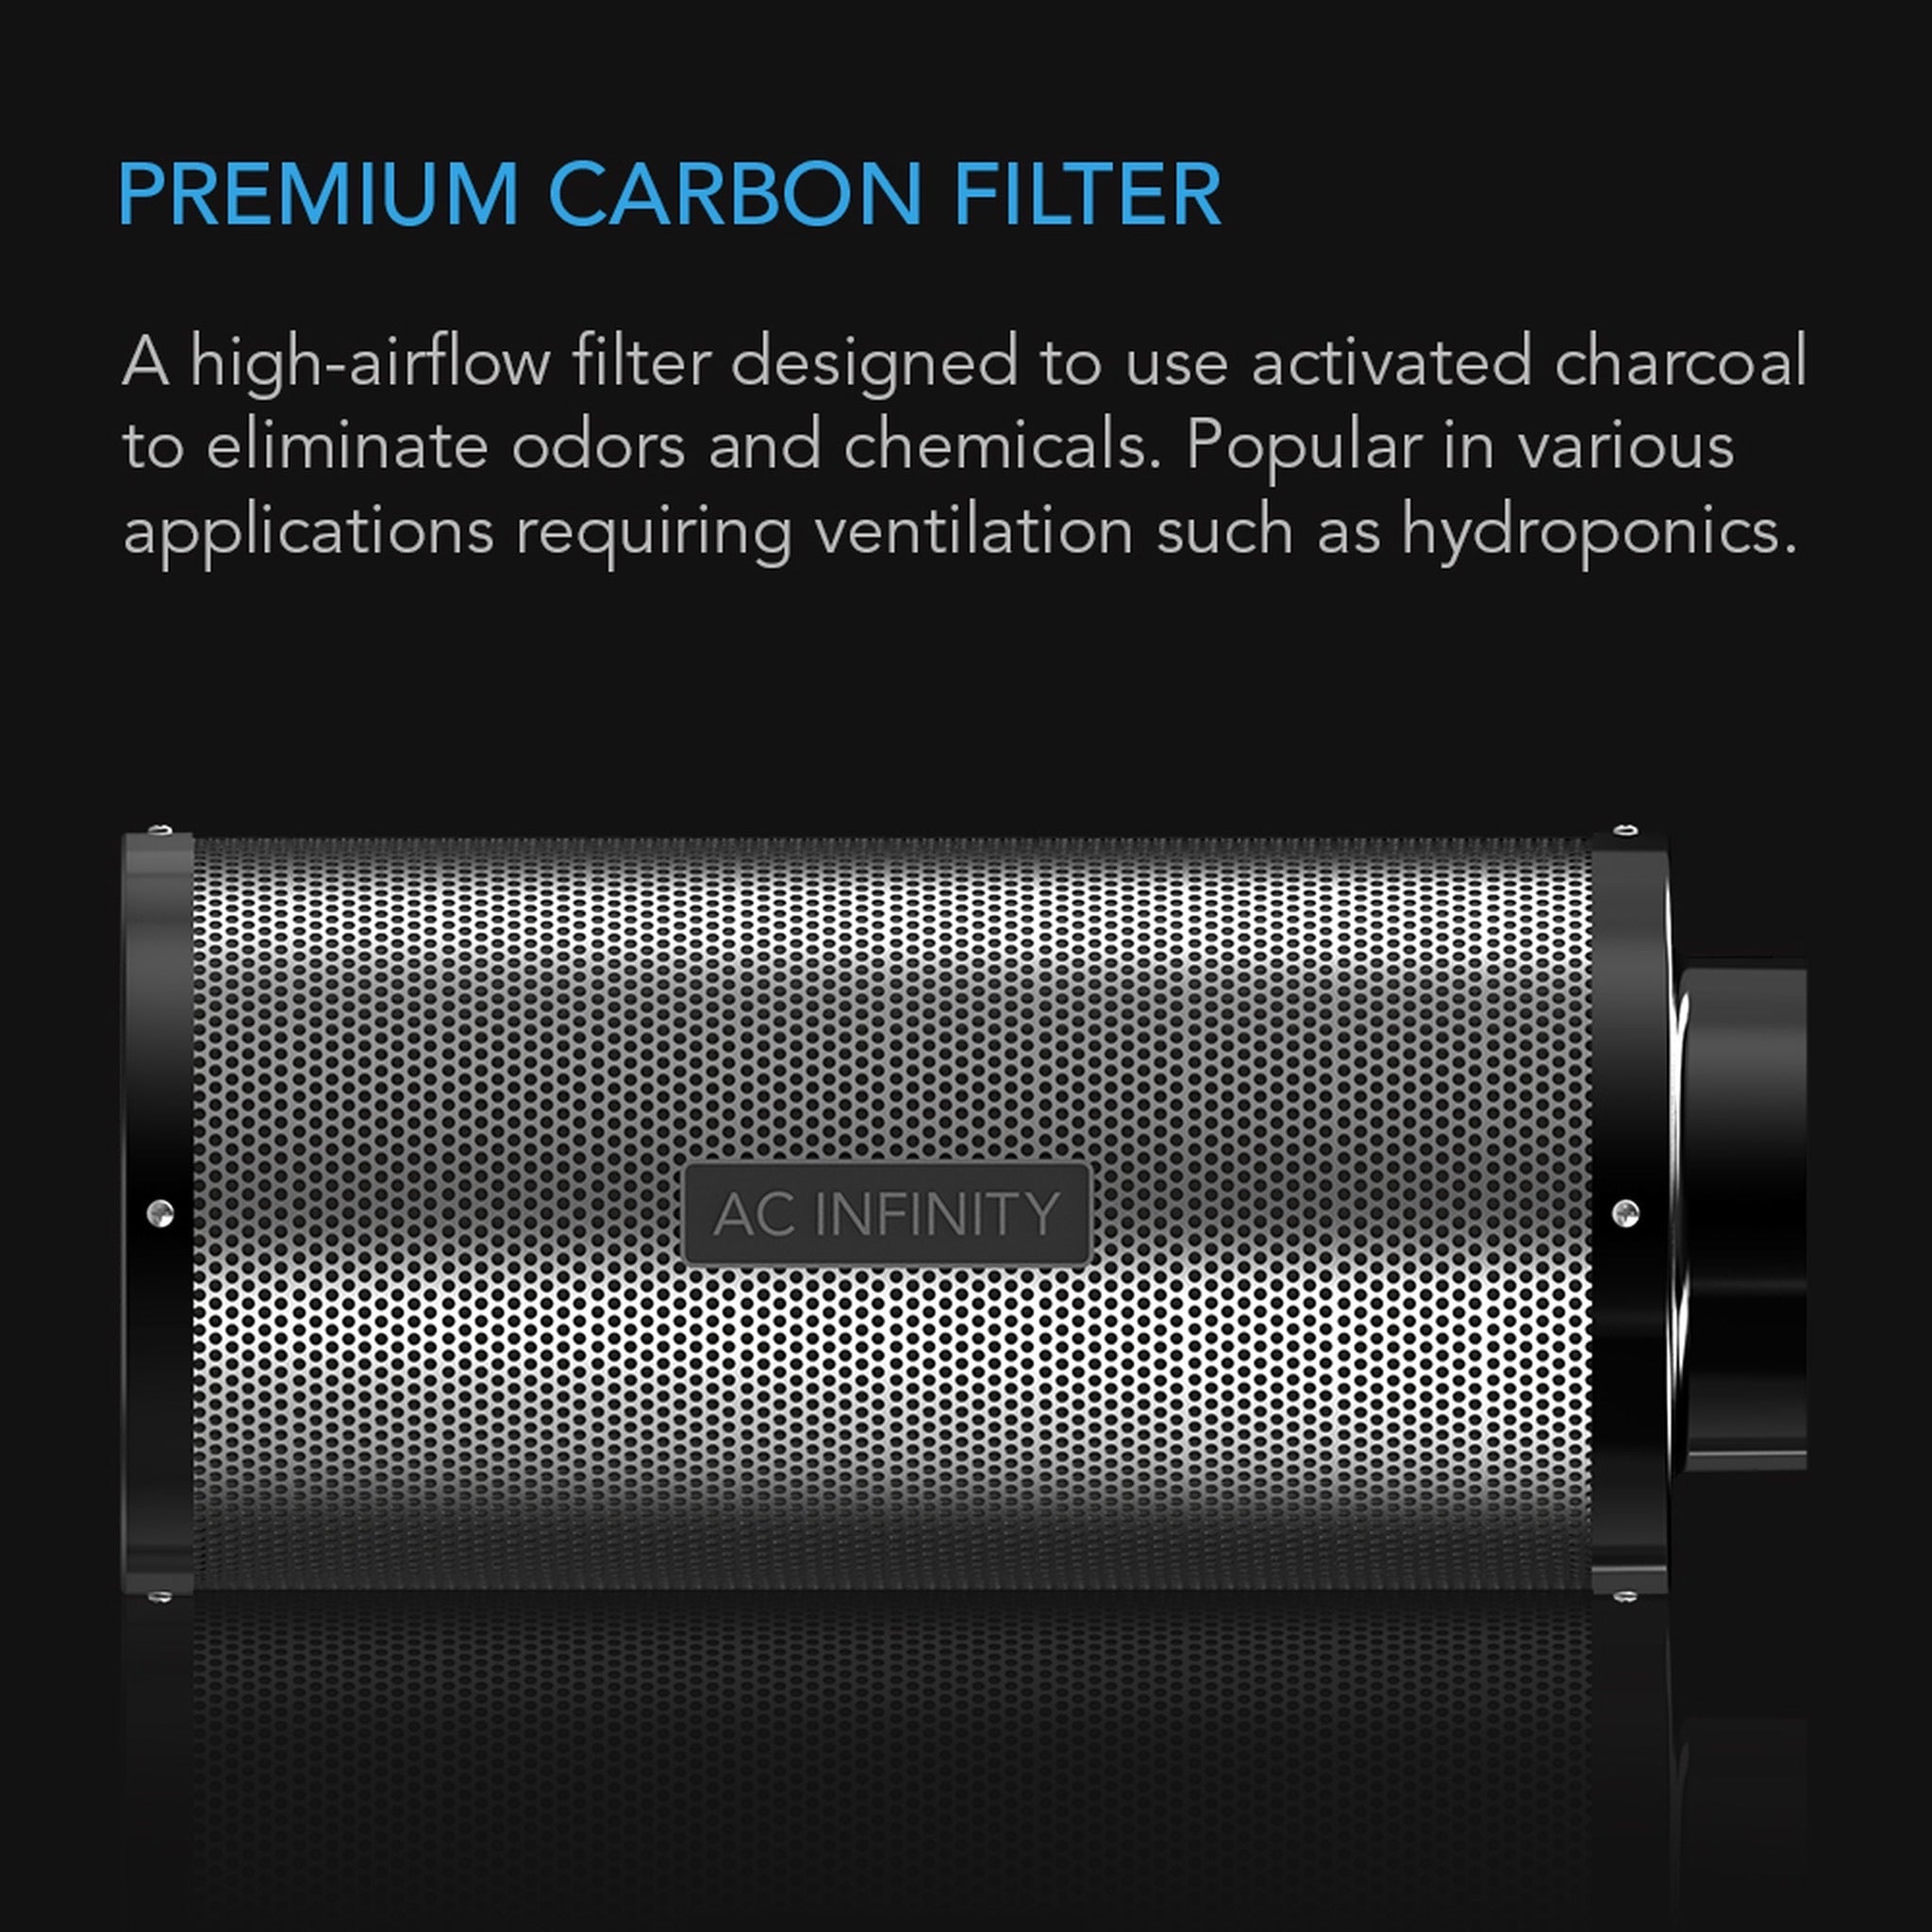 AC INFINITY, DUCT CARBON FILTER, AUSTRALIAN CHARCOAL, 10-INCH